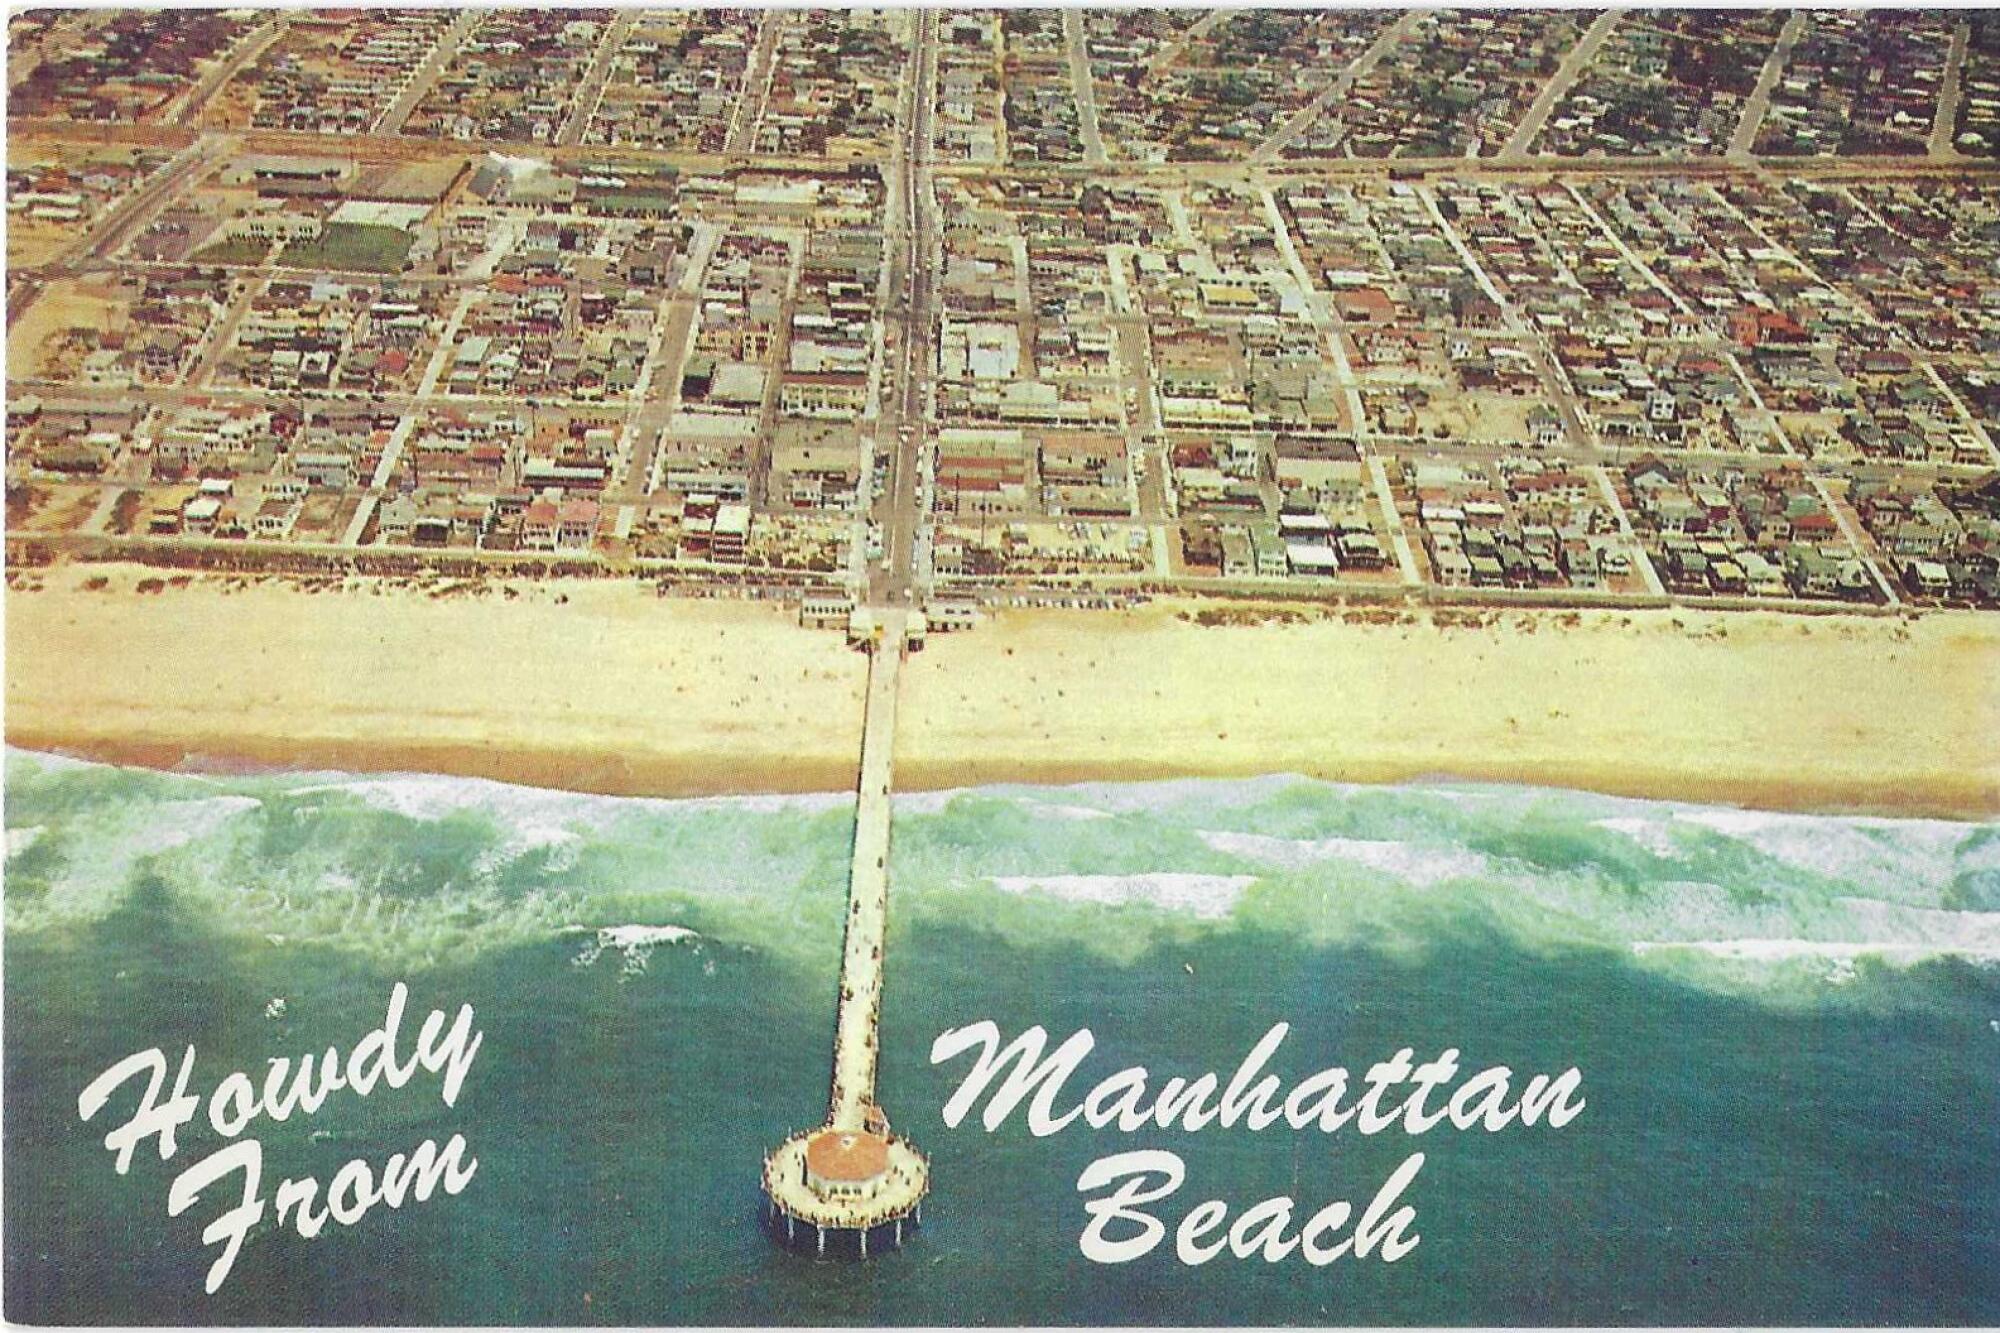 Old postcard depicting an aerial view of Manhattan Beach pier and shoreline, with the message: "Howdy from Manhattan Beach"